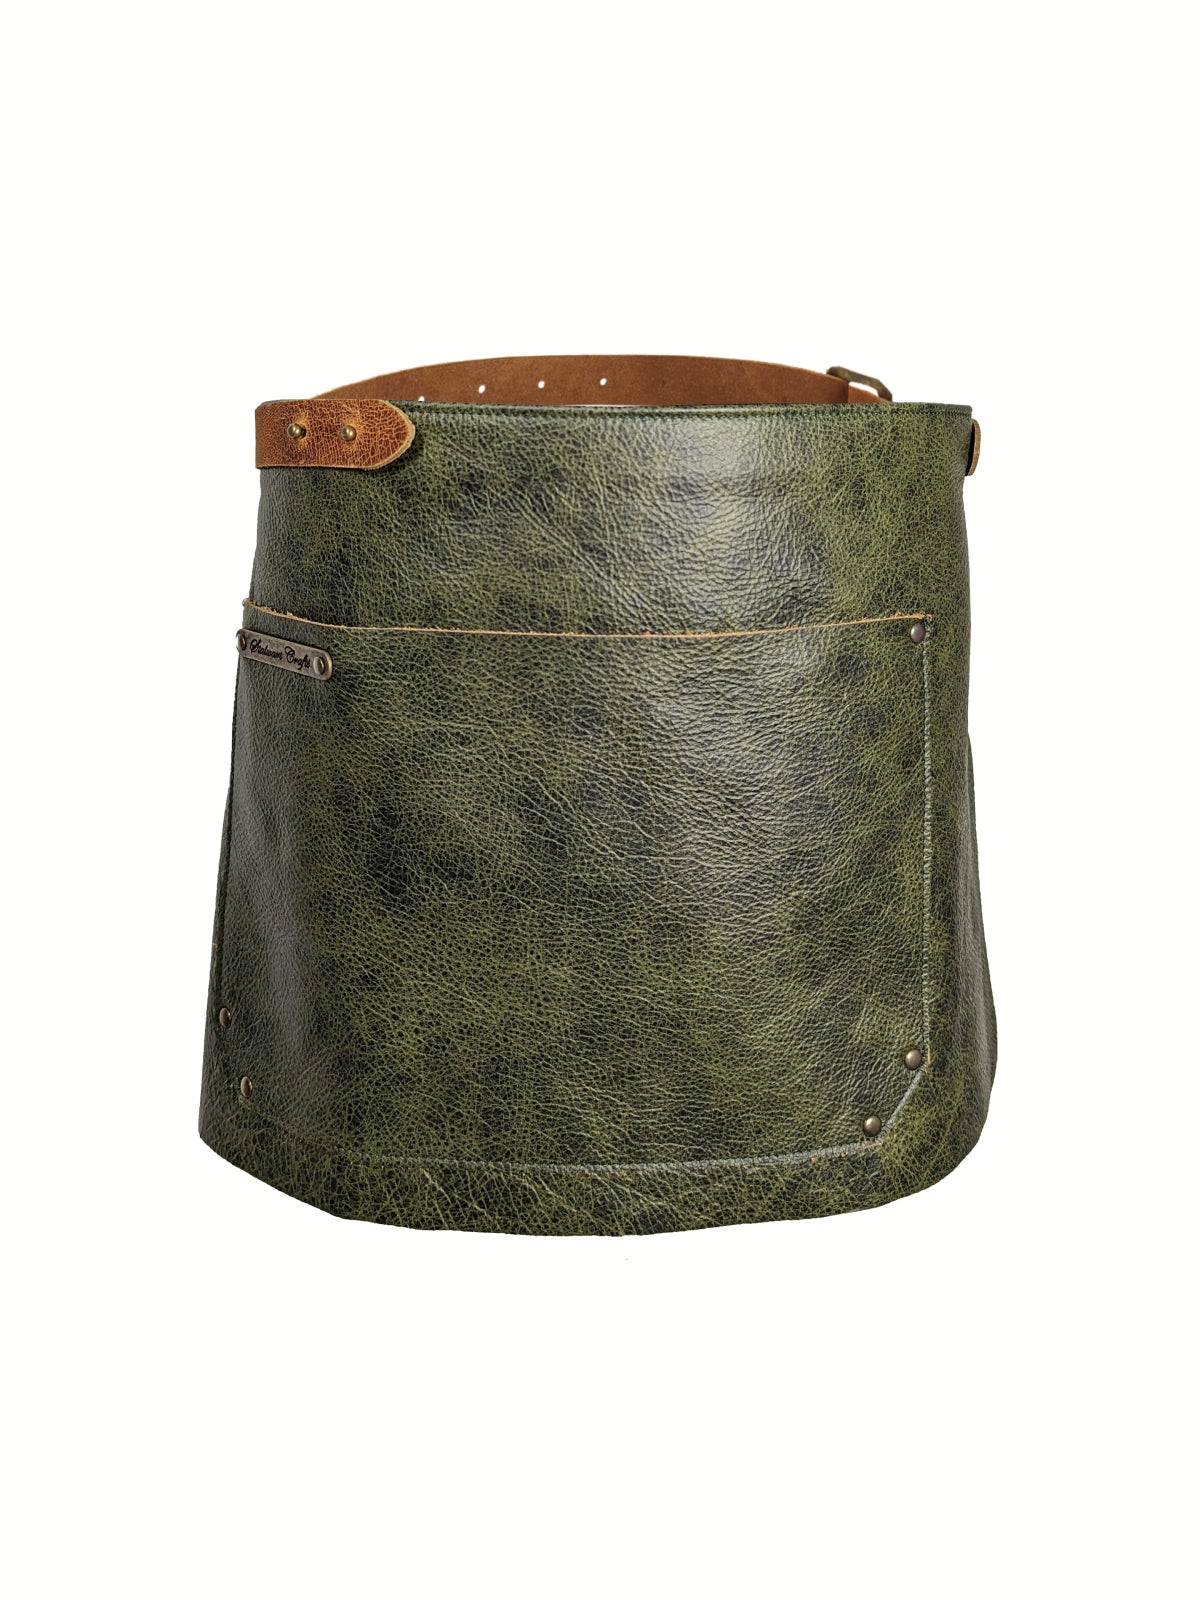 Leather Waist Apron Deluxe Green by Stalwart -  ChefsCotton